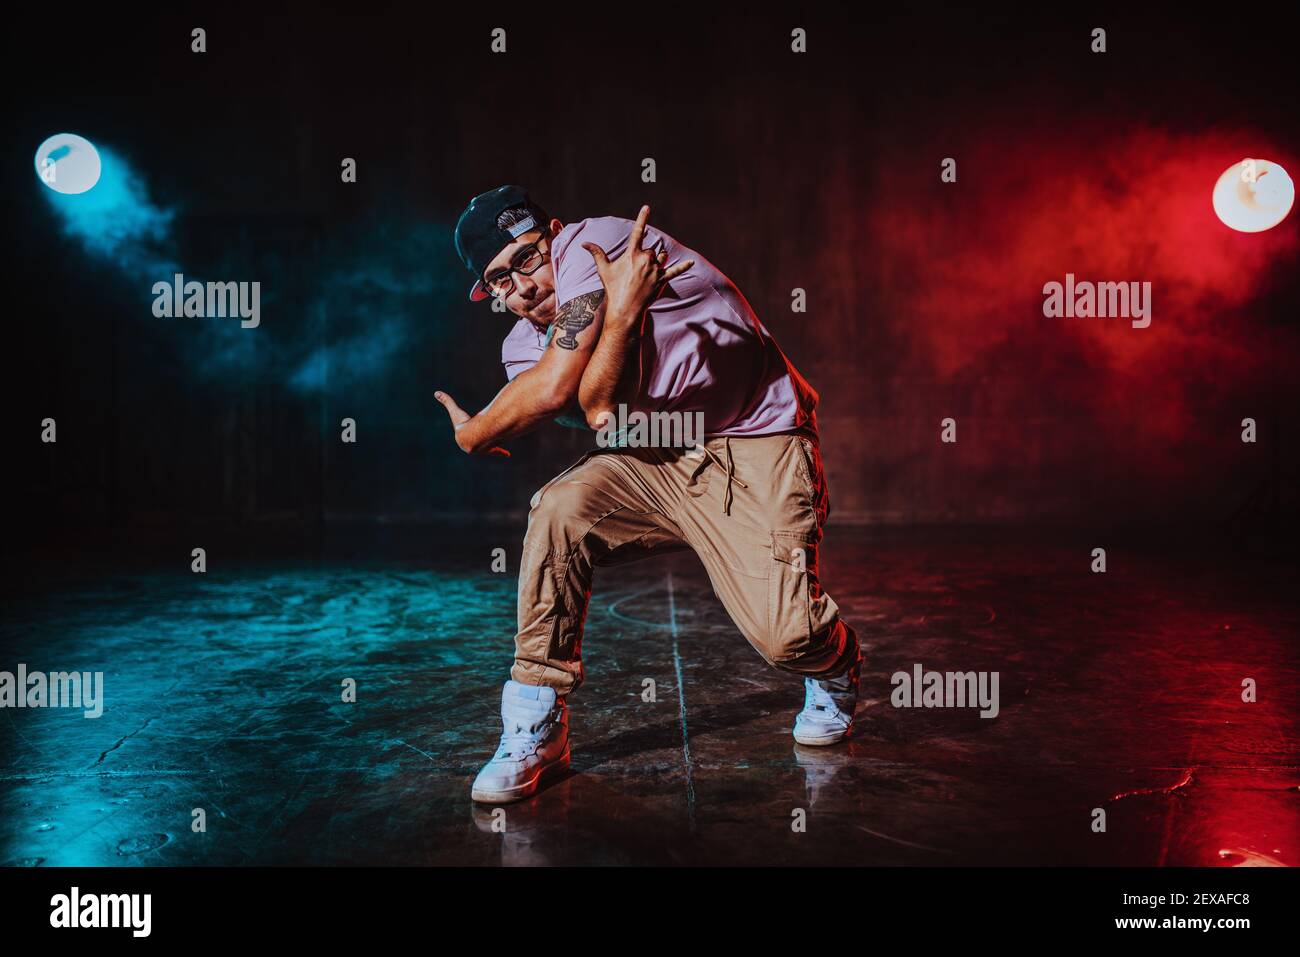 Young man break dancing in dark hall with blue and red lights. Tattoo on hand. Stock Photo